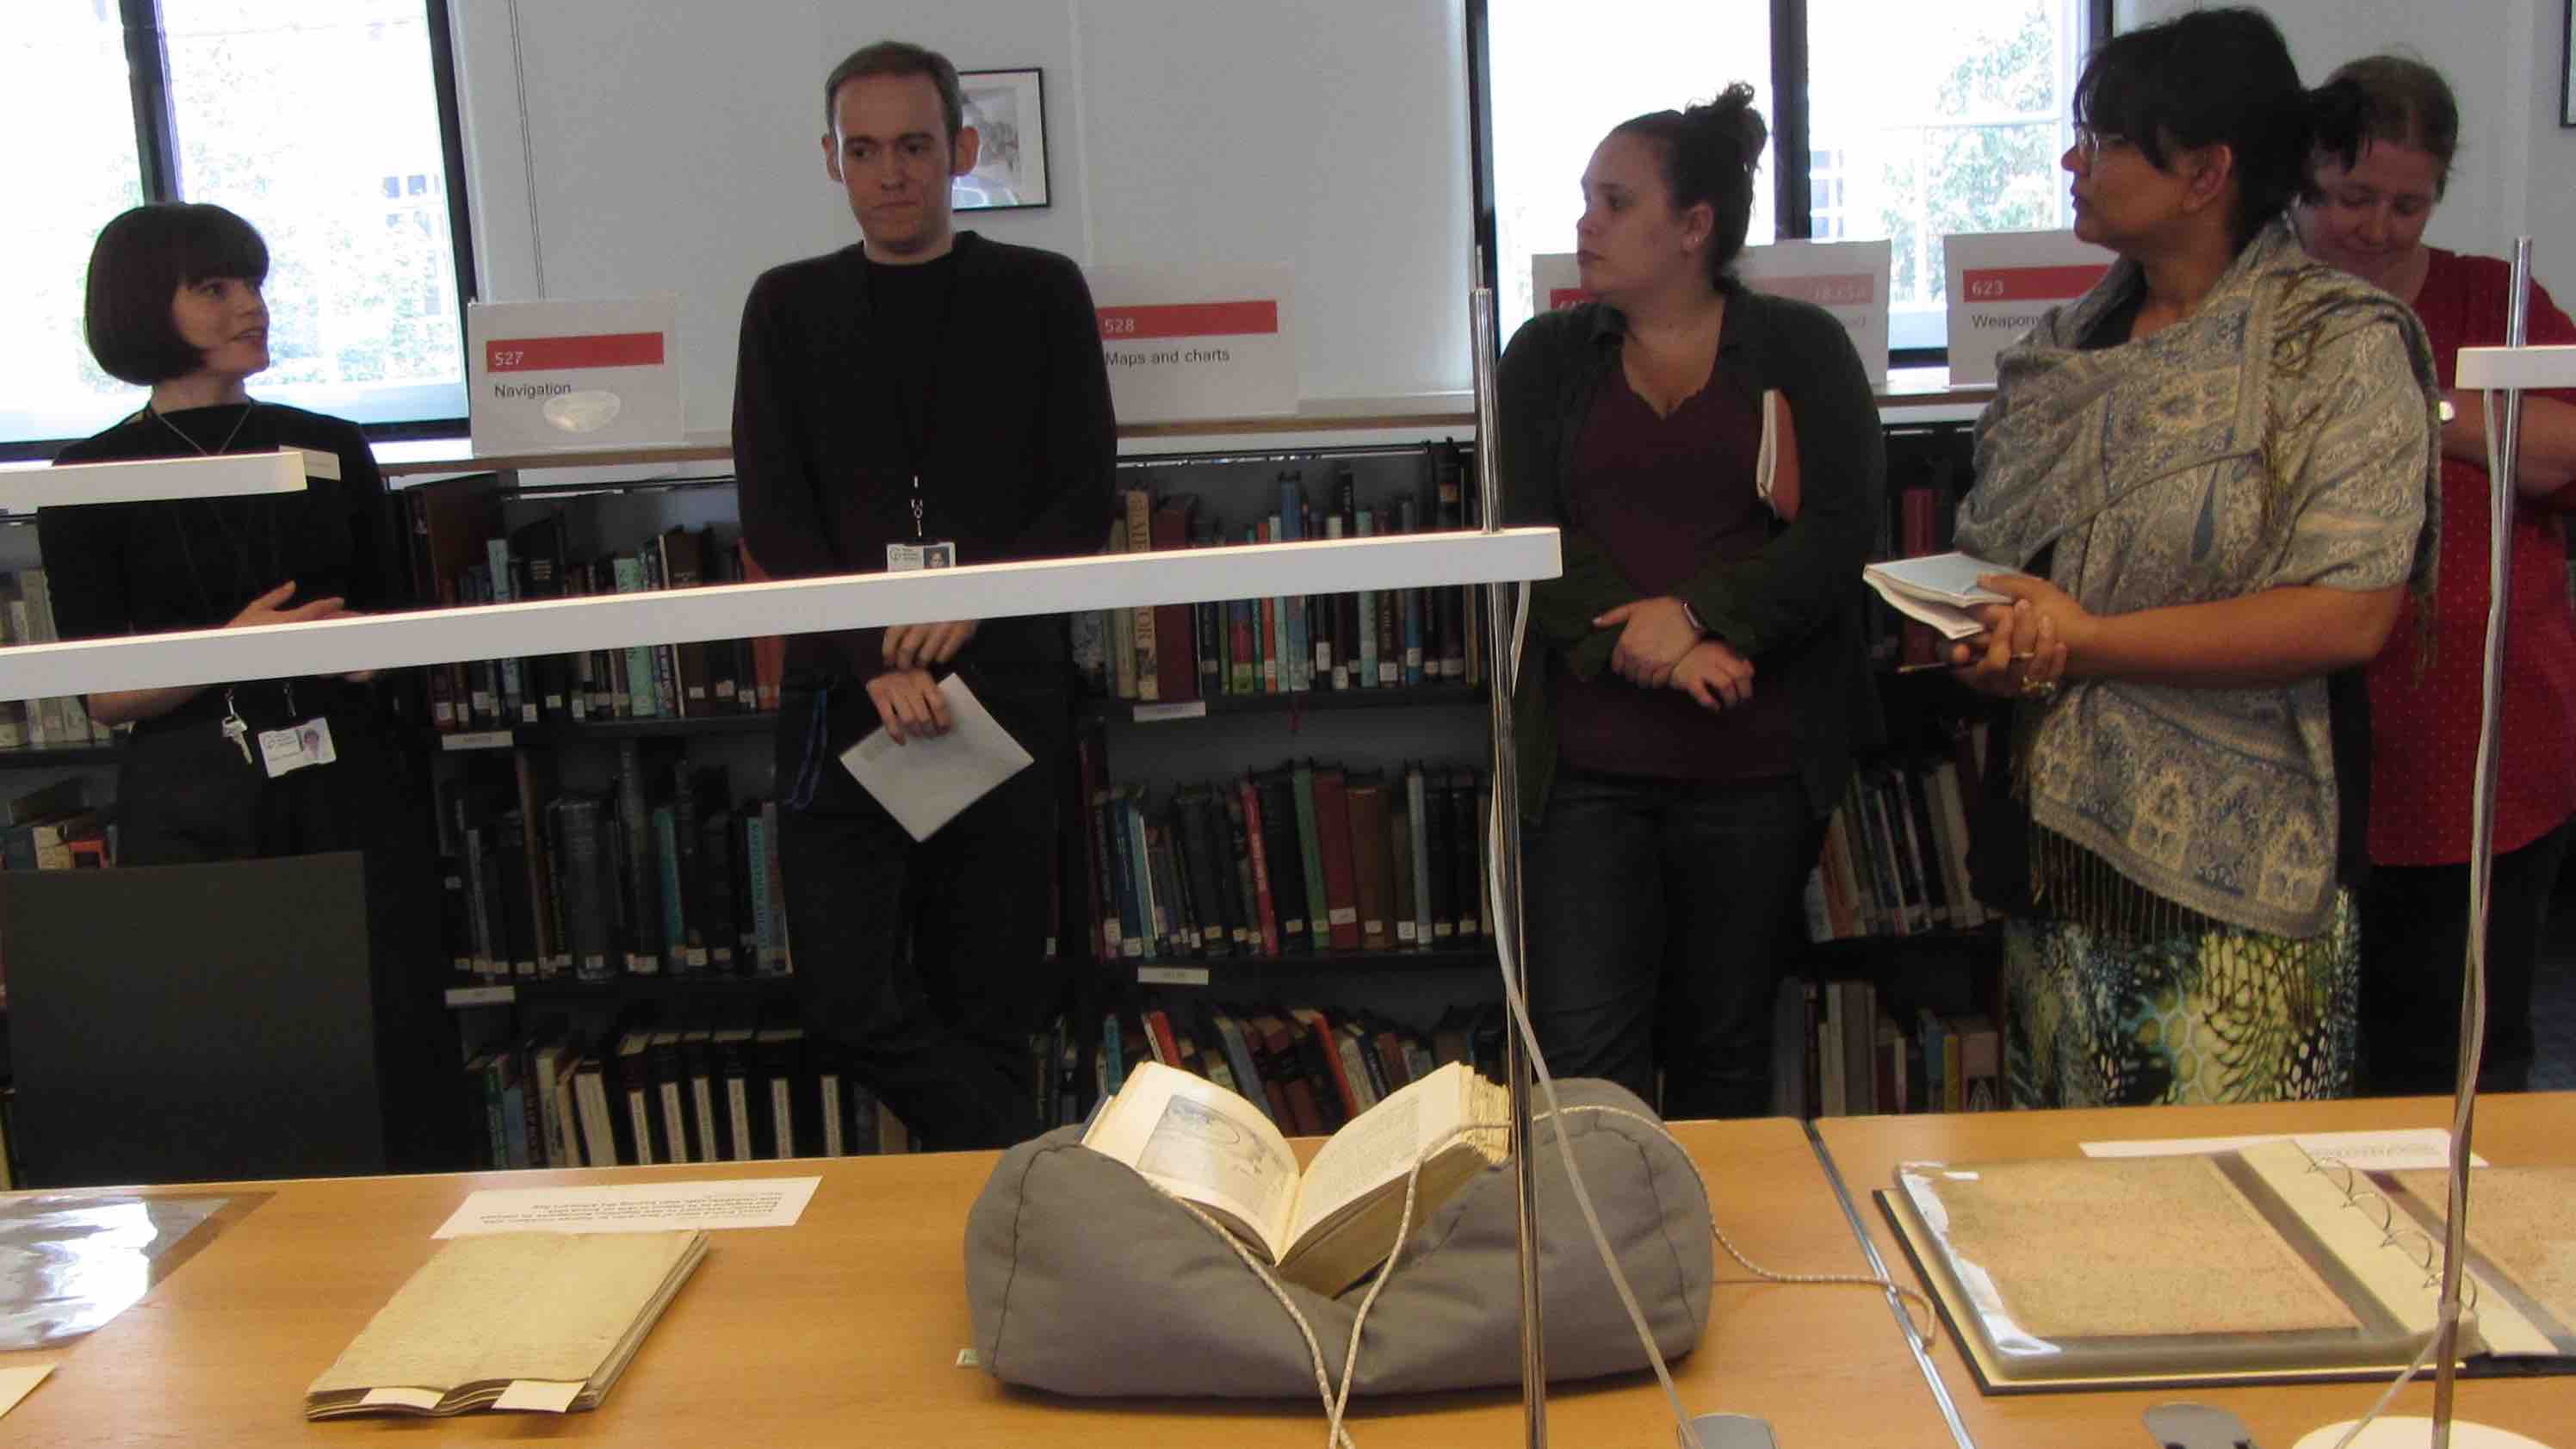 Students gathered around objects listening to archivists discussing their history